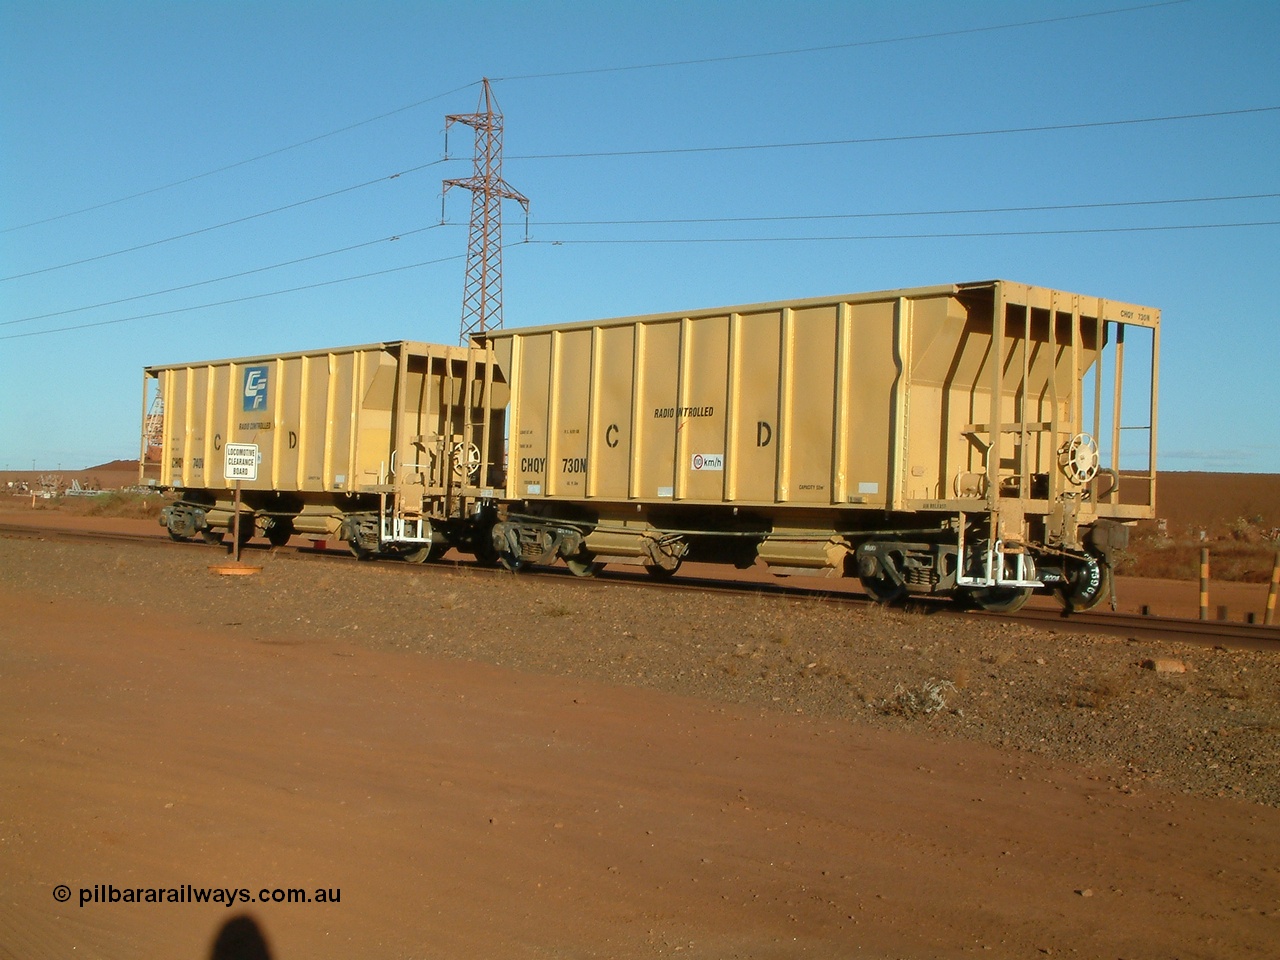 040815 164610
Nelson Point, CFCLA ballast waggon CHQY type 730 and 740 both just placed on rail for BHP Iron Ore as part of the Rail PACE project.
Keywords: CHQY-type;CHQY730;CFCLA;CRDX-type;BHP-ballast-waggon;